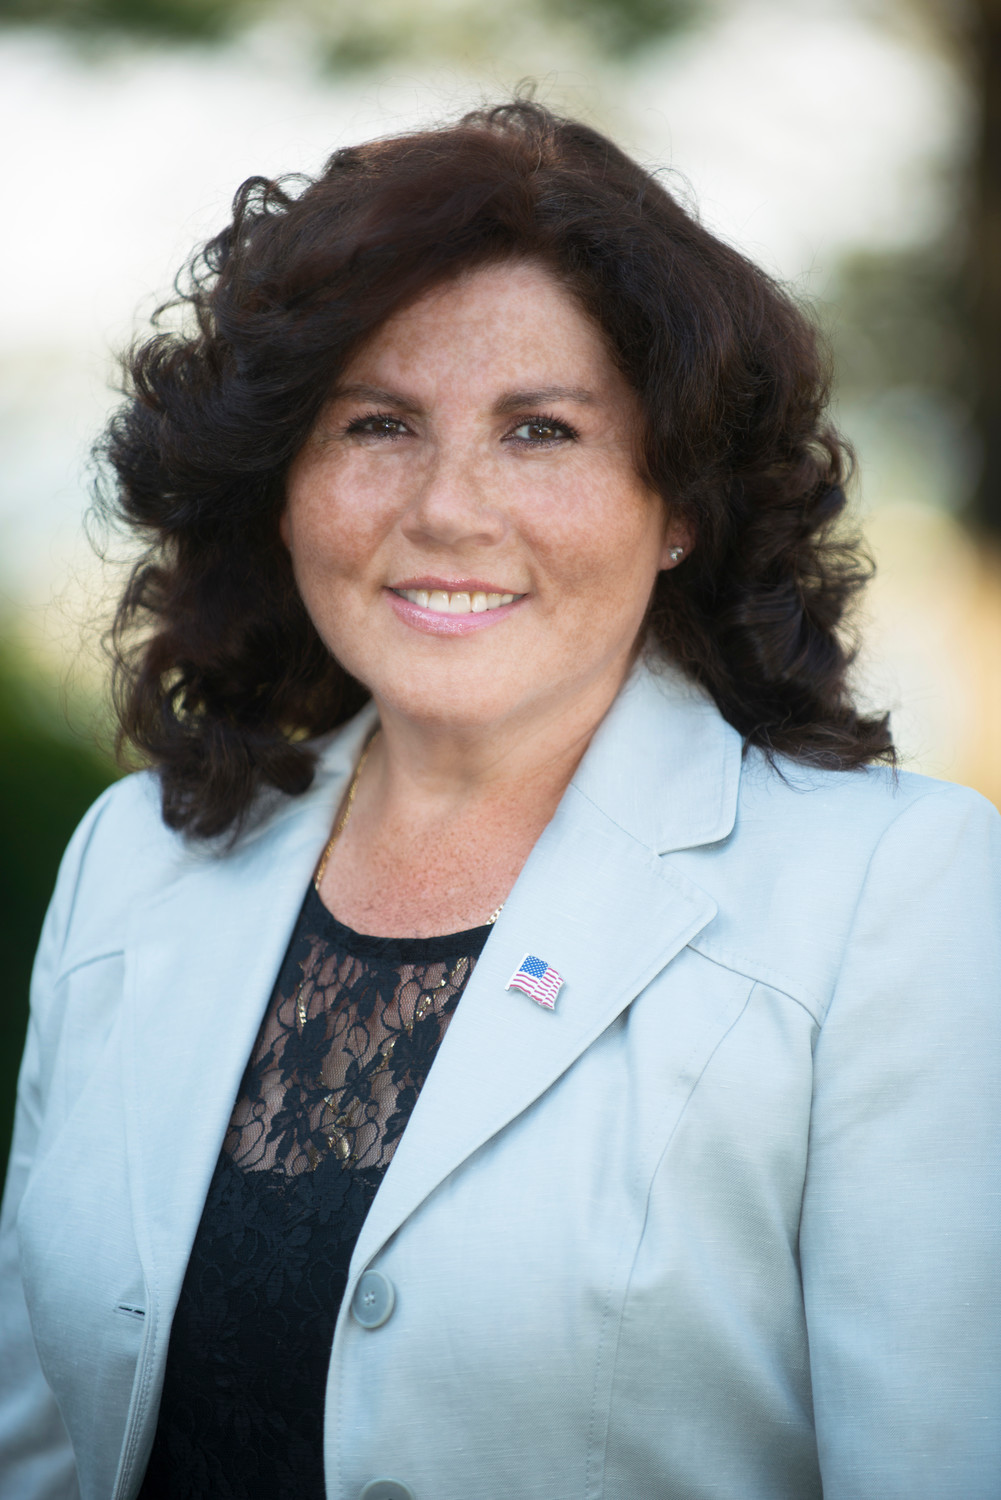 Marcela De La Fuente
Challenger

Age: 58
Party affiliations: Democratic, Working Families and Woman’s Equality
Profession: Former business owner
Years in Glen Cove: 40
Family: Married, five children